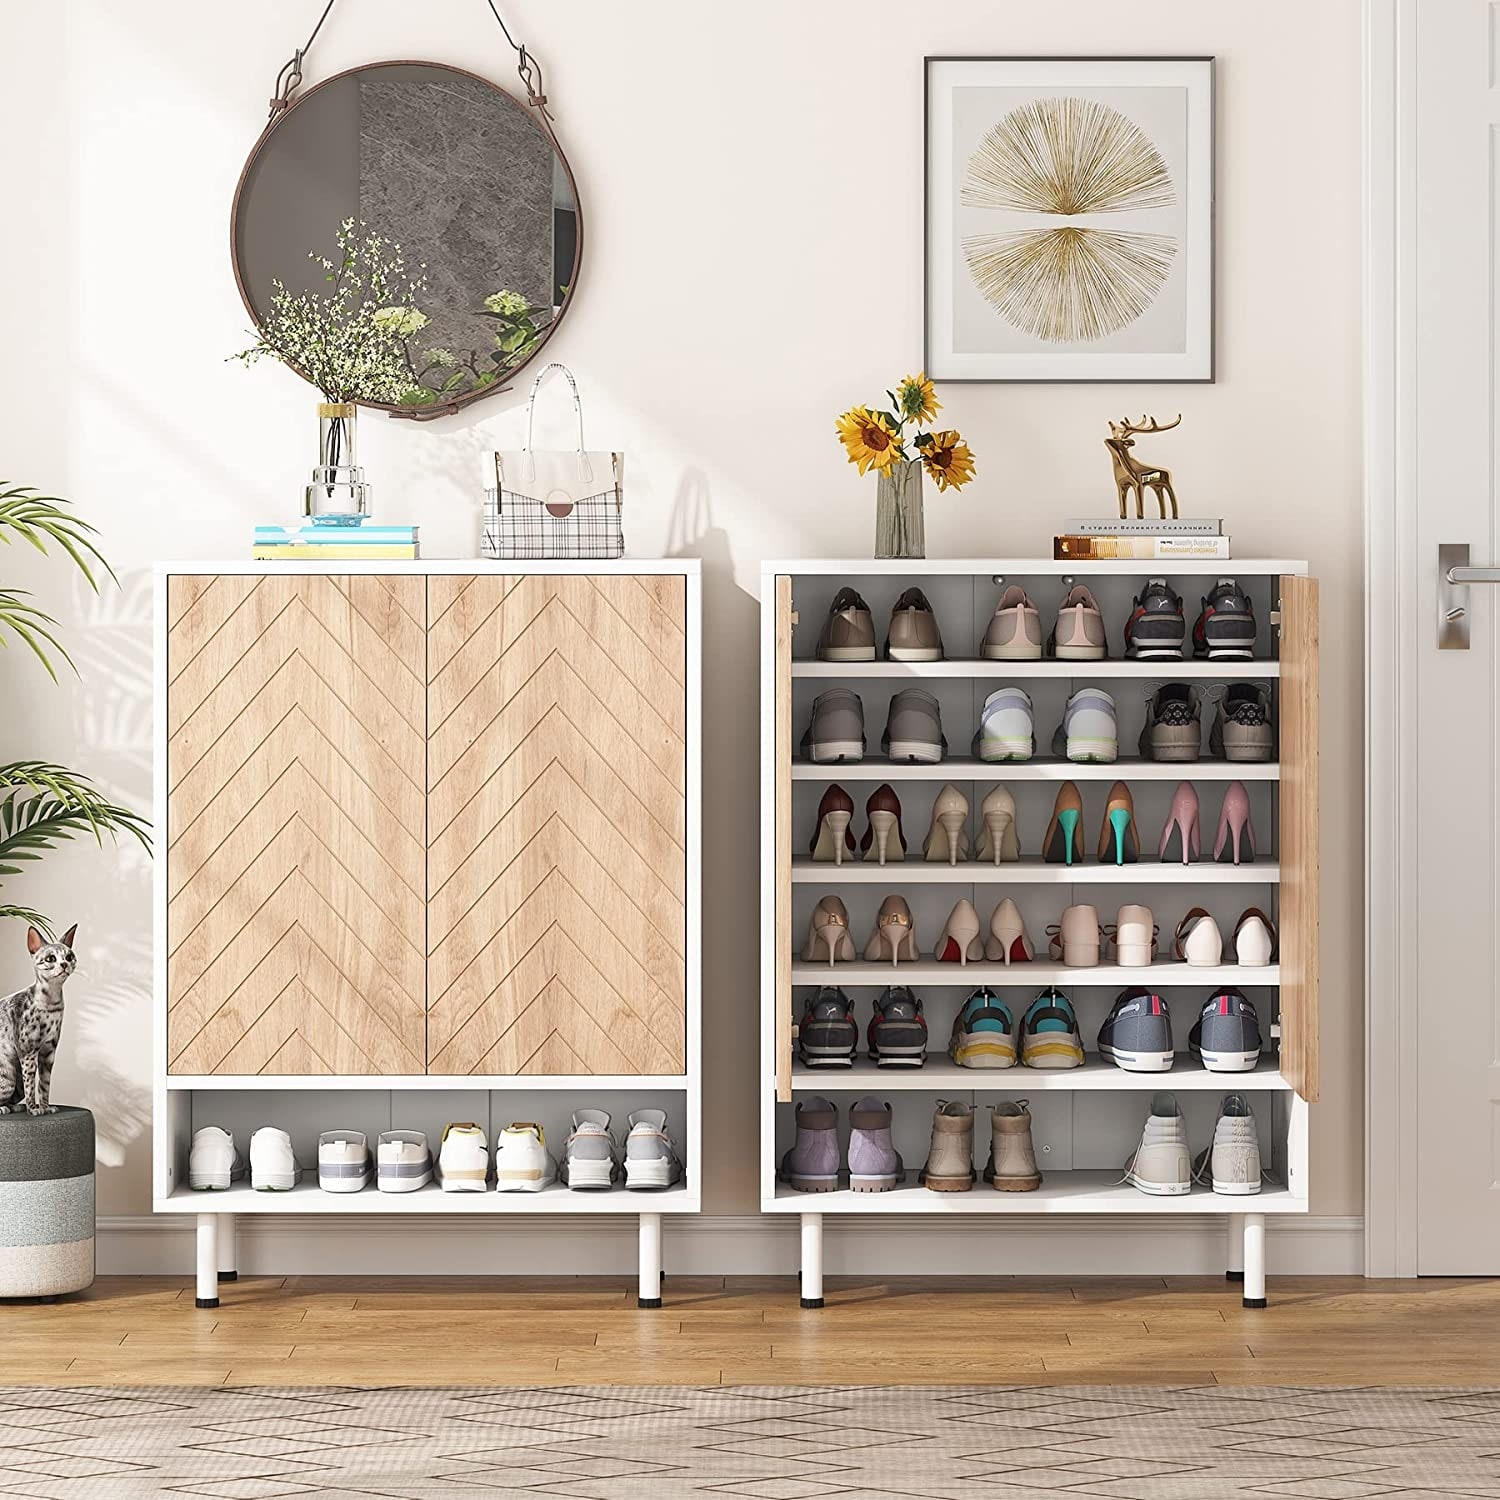 https://ak1.ostkcdn.com/images/products/is/images/direct/1a25e86306b5a883a971e38e8147cde61bede89f/18-Pair-Shoe-Storage-Cabinet-for-Entryway-Shoe-Rack-Organizer.jpg